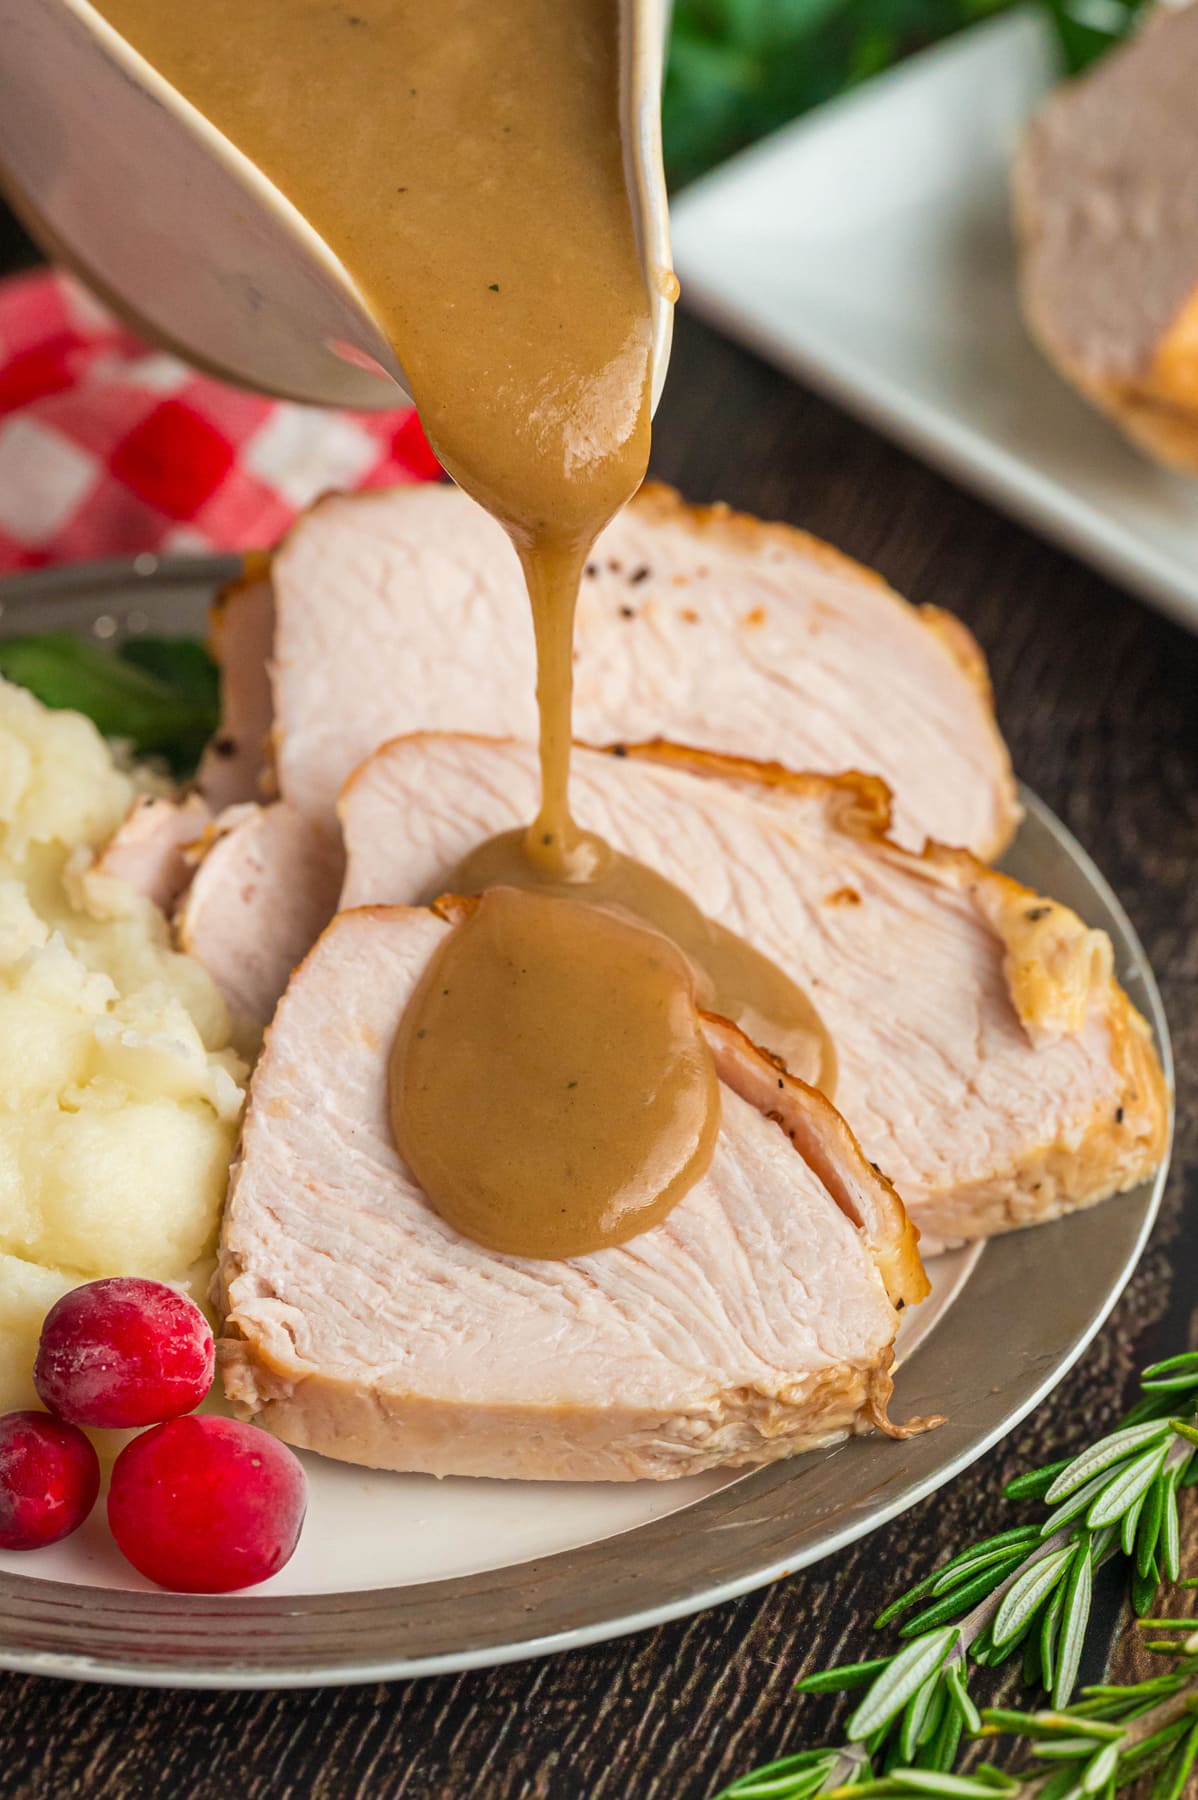 Gravy from drippings being poured over sliced turkey